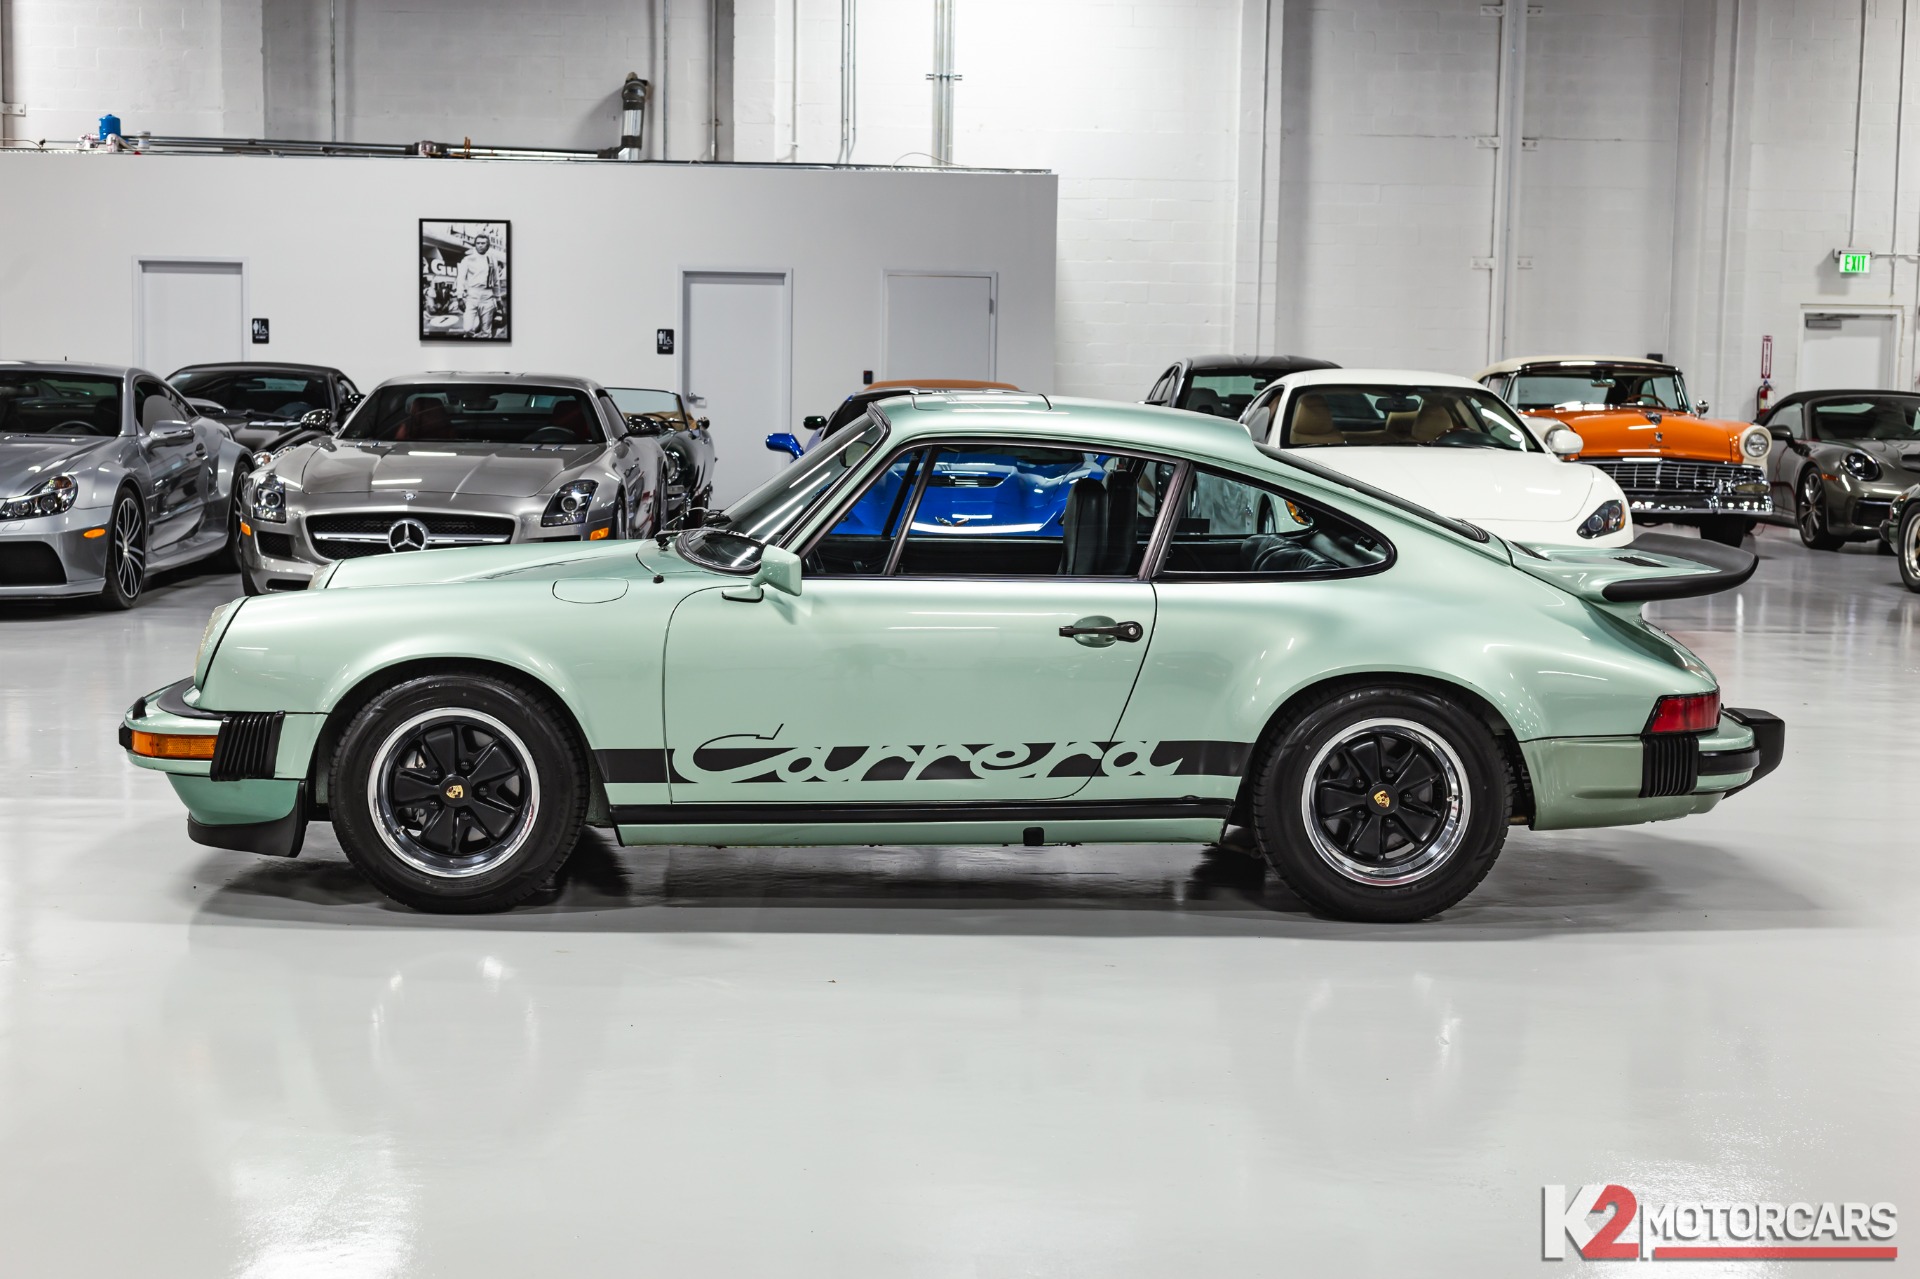 Used 1975 Porsche 911 Carrera For Sale (Sold) | K2 Motorcars Stock #00021